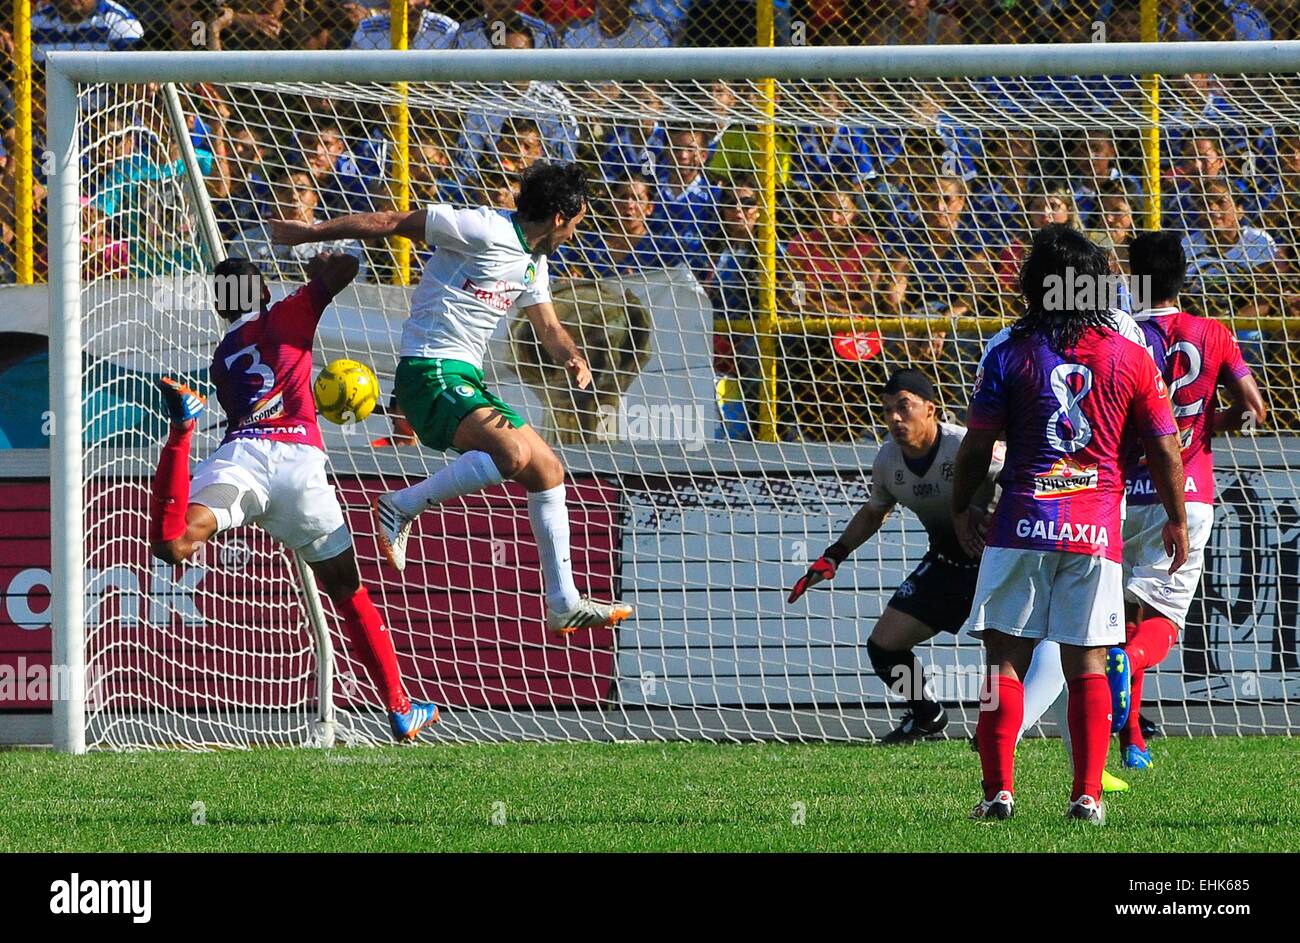 San Salvador, El Salvador. 14th Mar, 2015. Raul Gonzalez Blanco (2nd L) of New York Cosmos heads the ball to score during a friendly match against El Salvador's Club Deportivo FAS held at Cuscatlan Stadium, in San Salvador, El Salvador, March 14, 2015. © Luis Galdamez/Xinhua/Alamy Live News Stock Photo